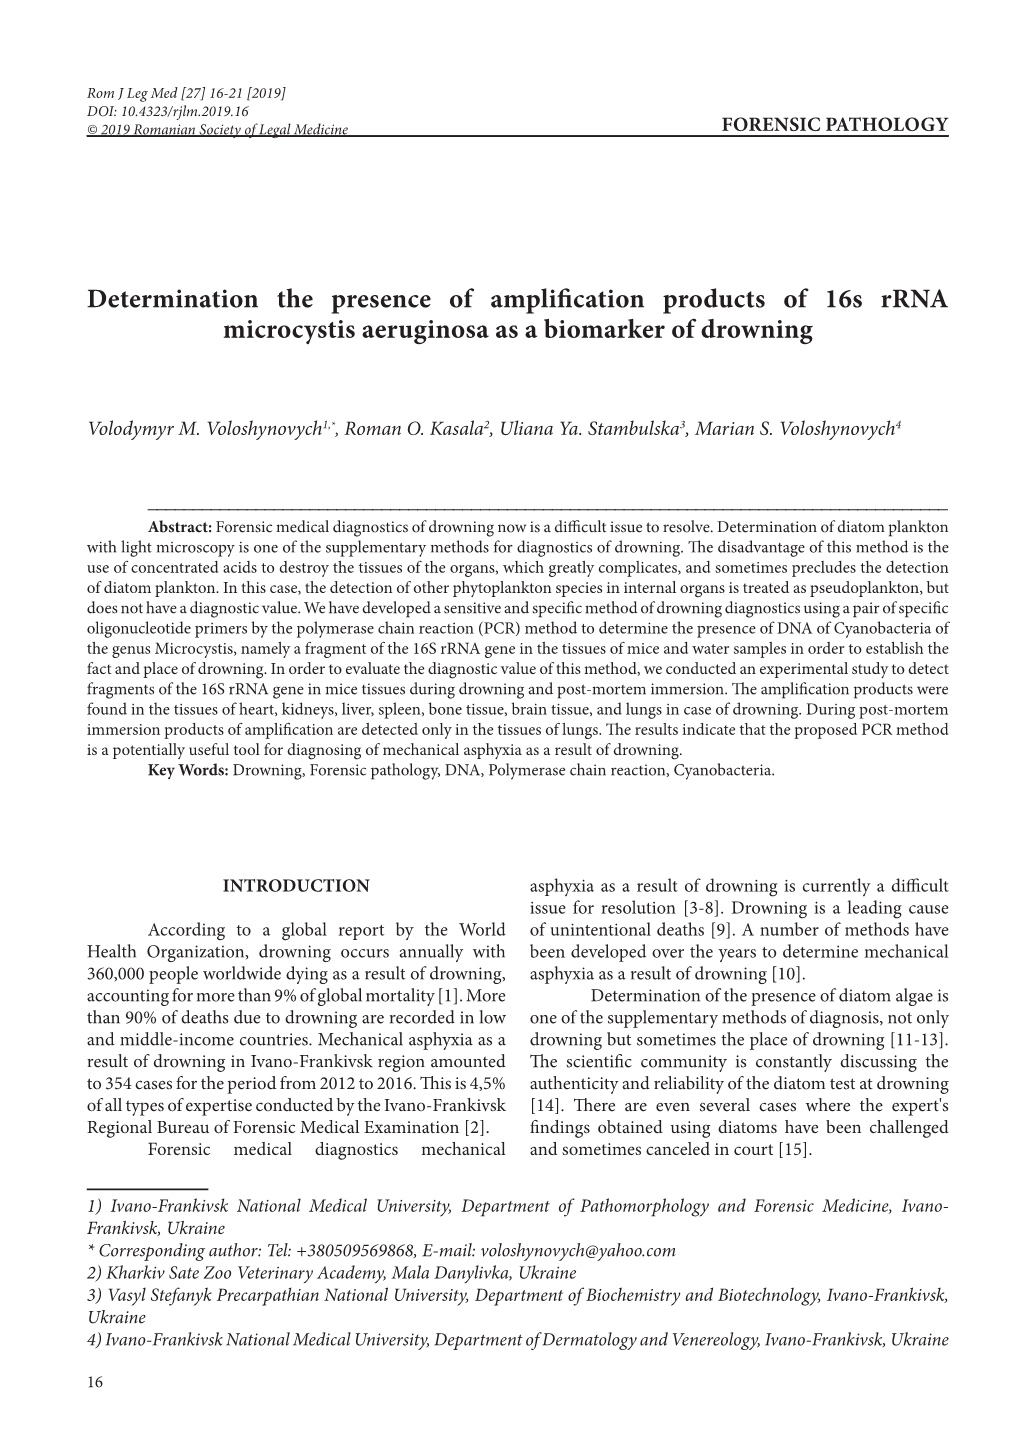 Determination the Presence of Amplification Products of 16S Rrna Microcystis Aeruginosa As a Biomarker of Drowning